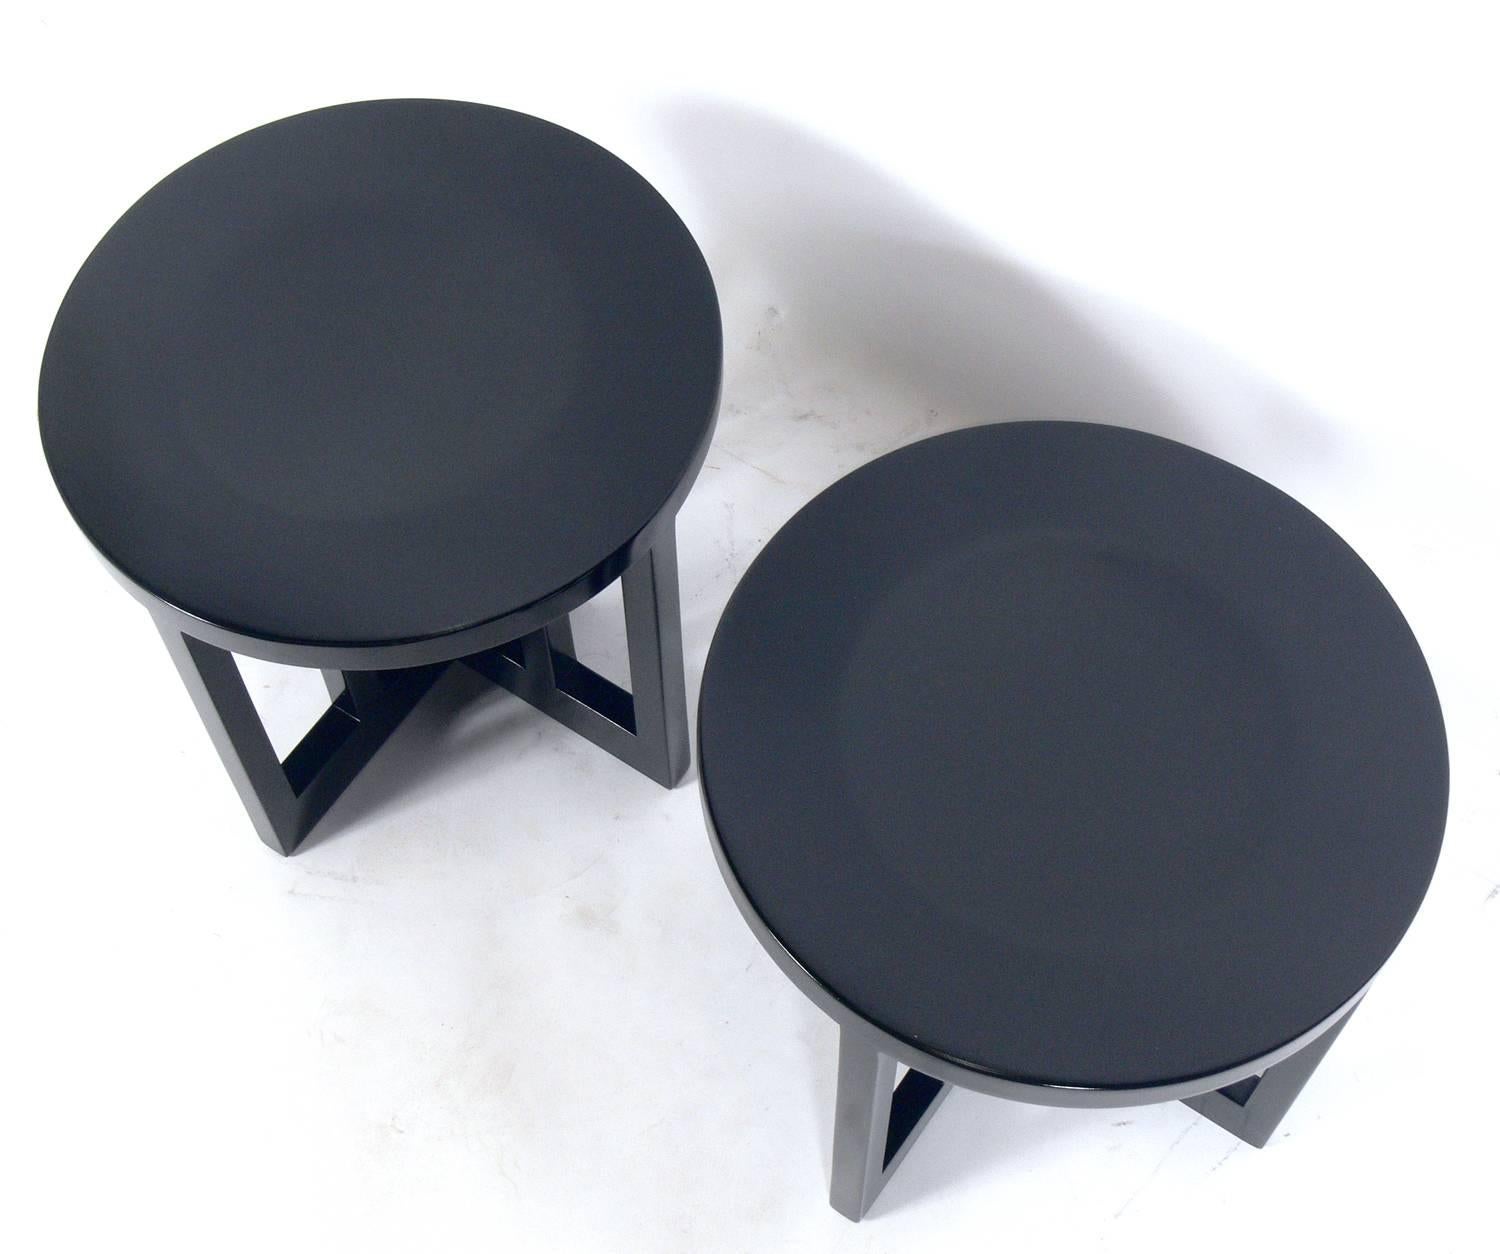 American Pair of Architectural Stools by Richard Meier for Knoll